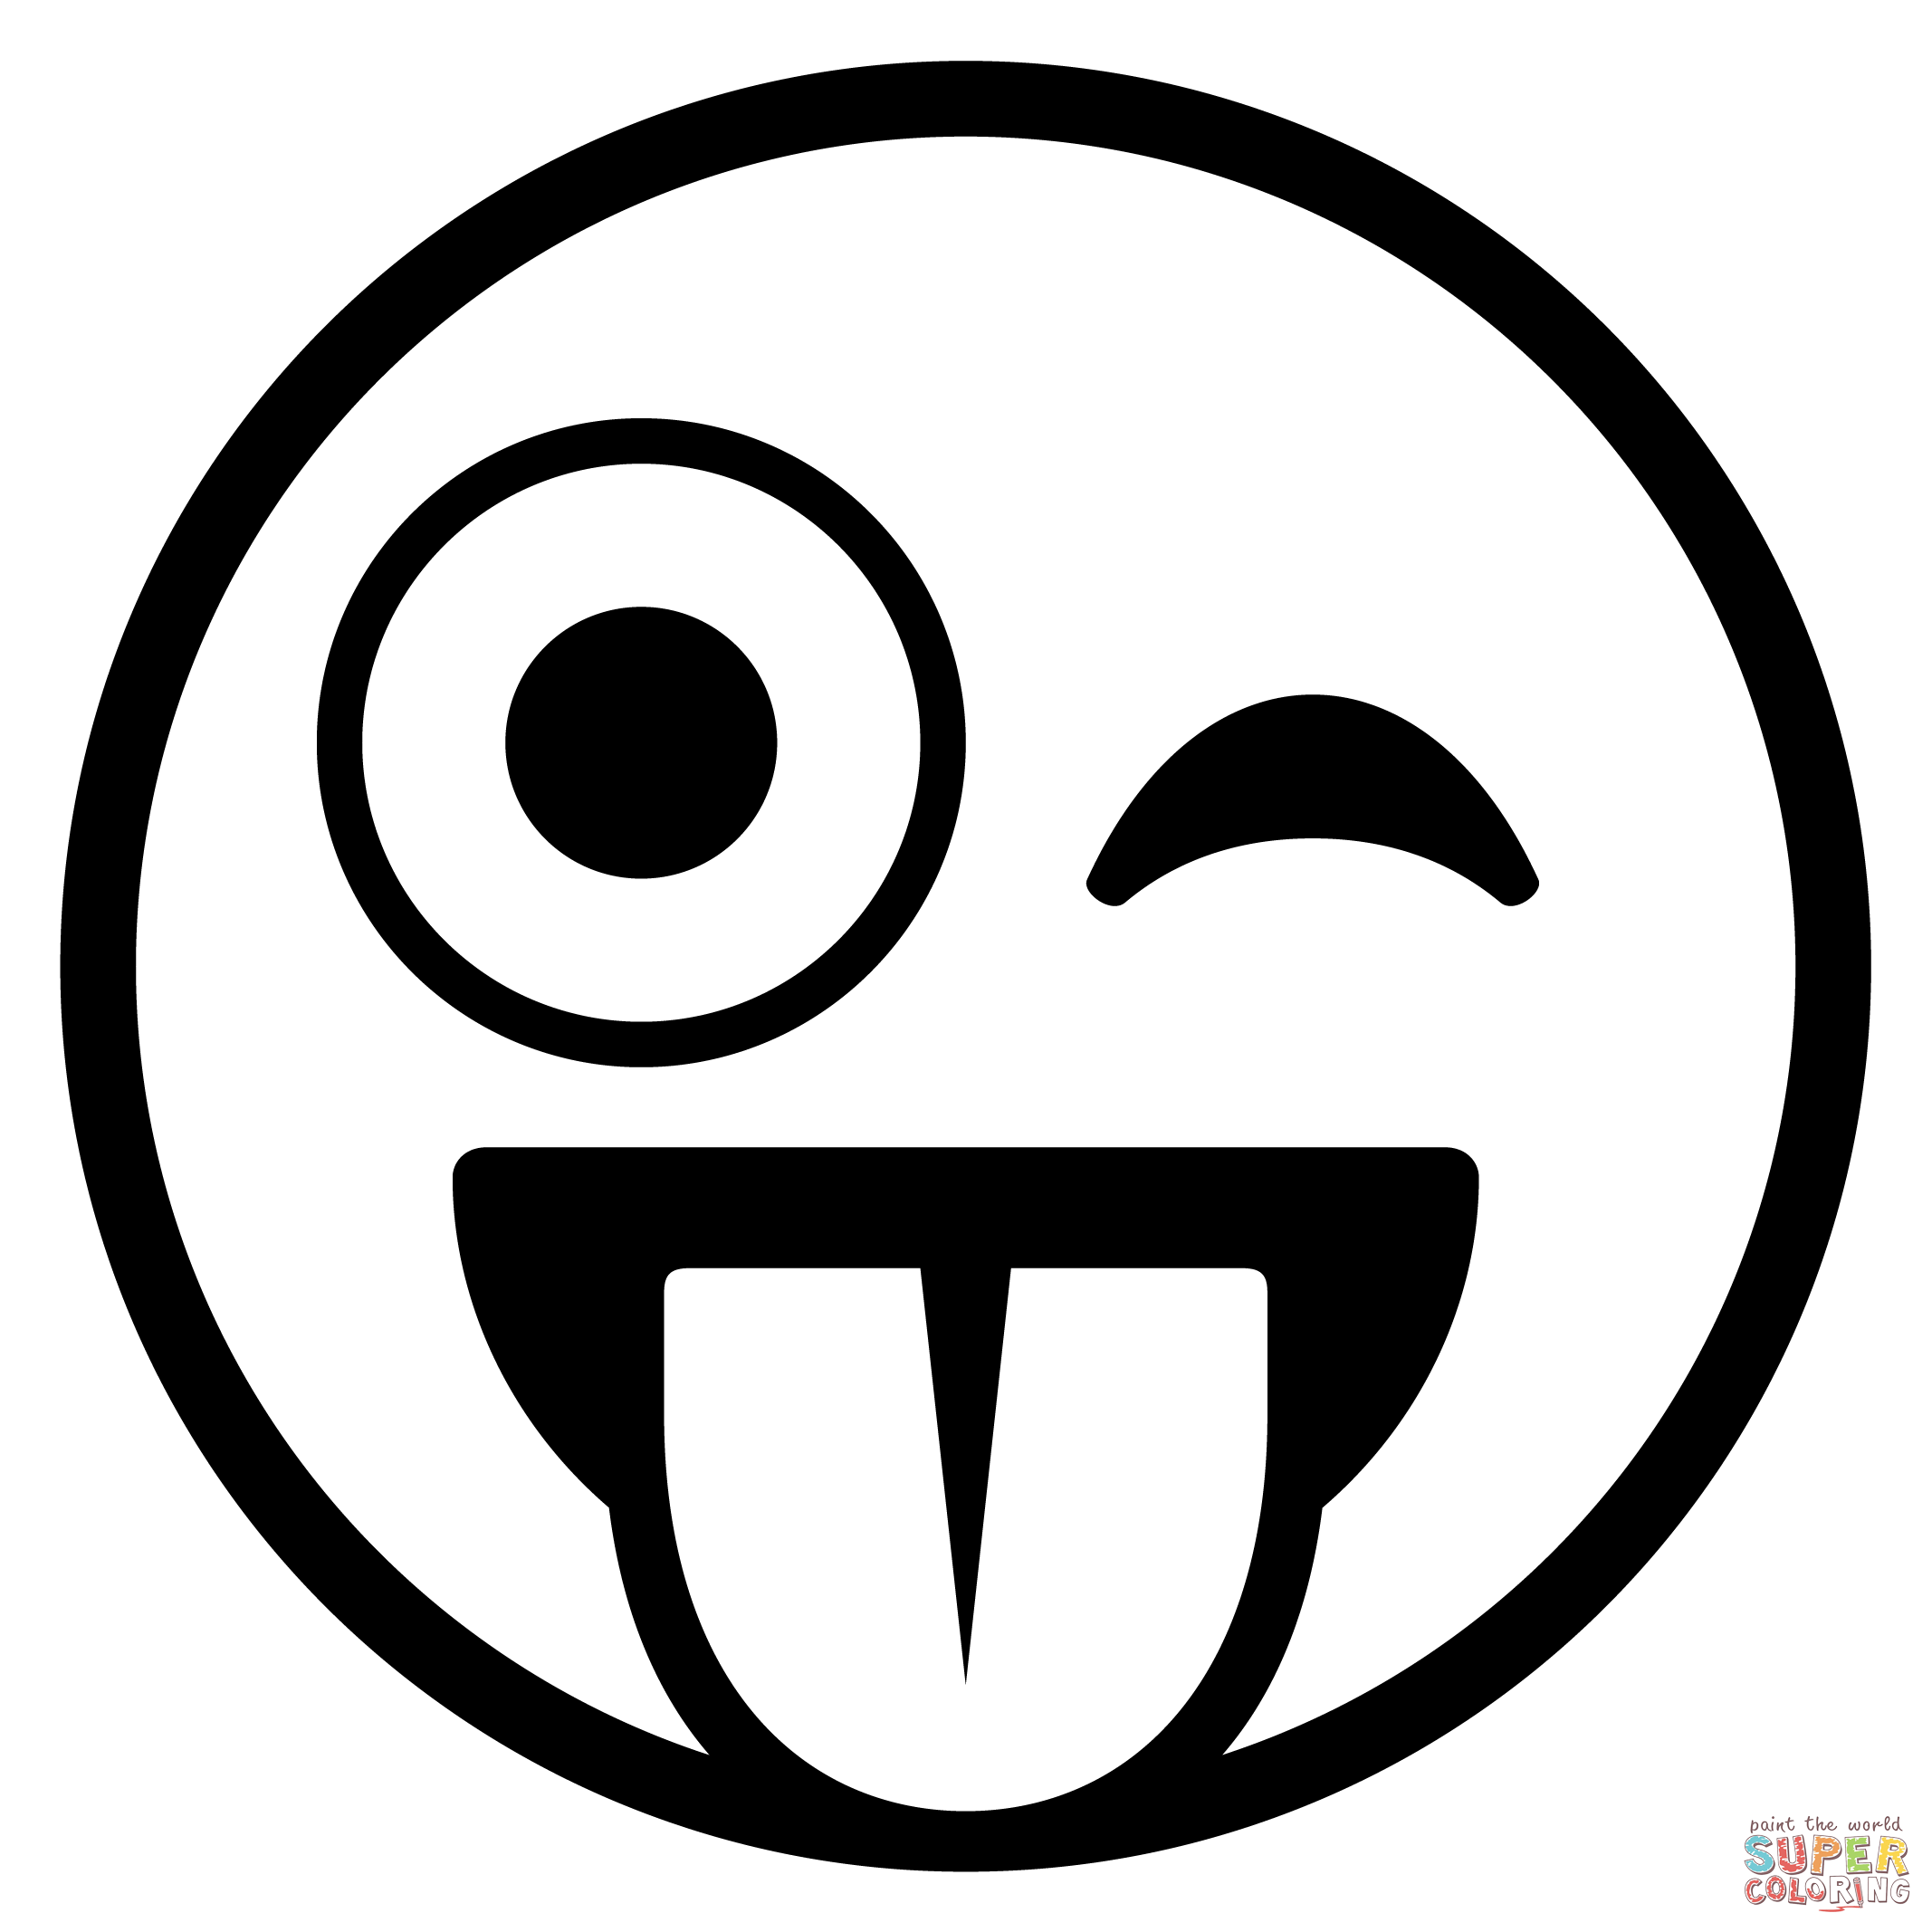 Winking Face with Tongue Emoji coloring page | Free Printable Coloring Pages